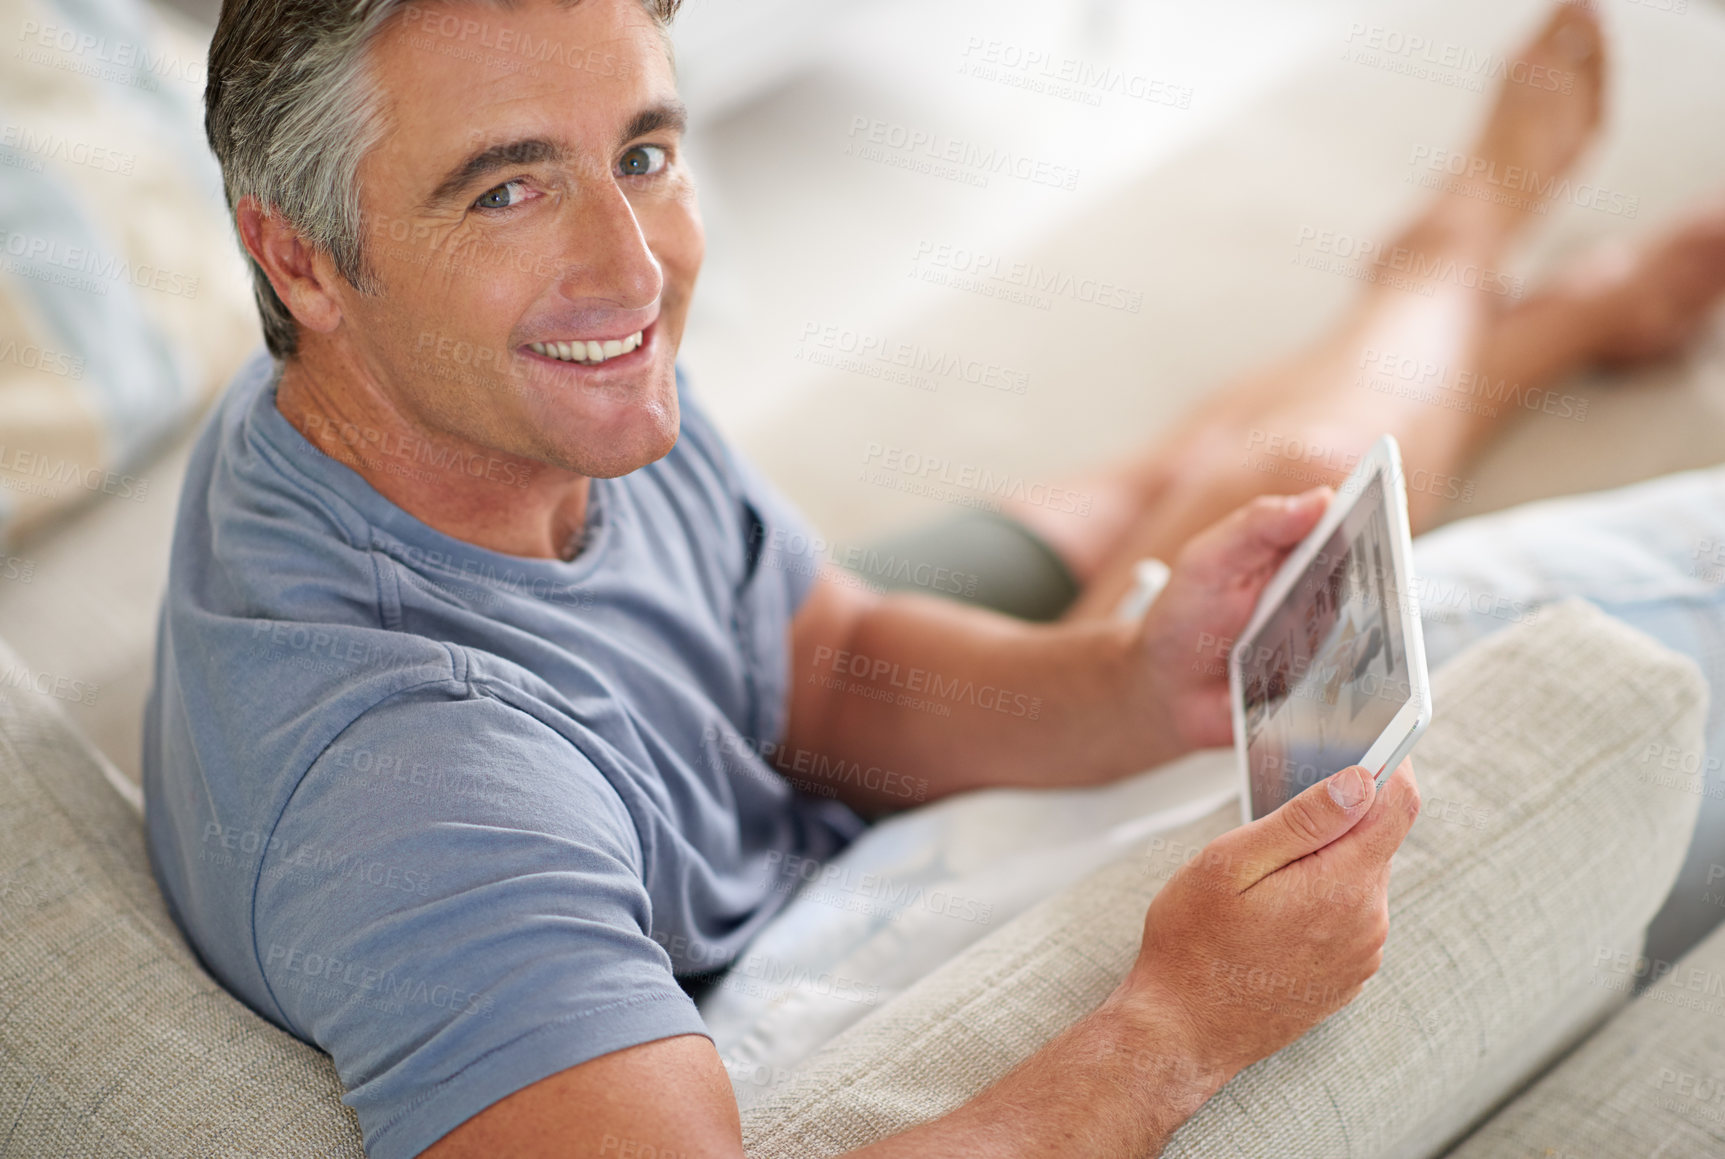 Buy stock photo Portrait of a handsome mature man using a digital tablet while relaxing at home